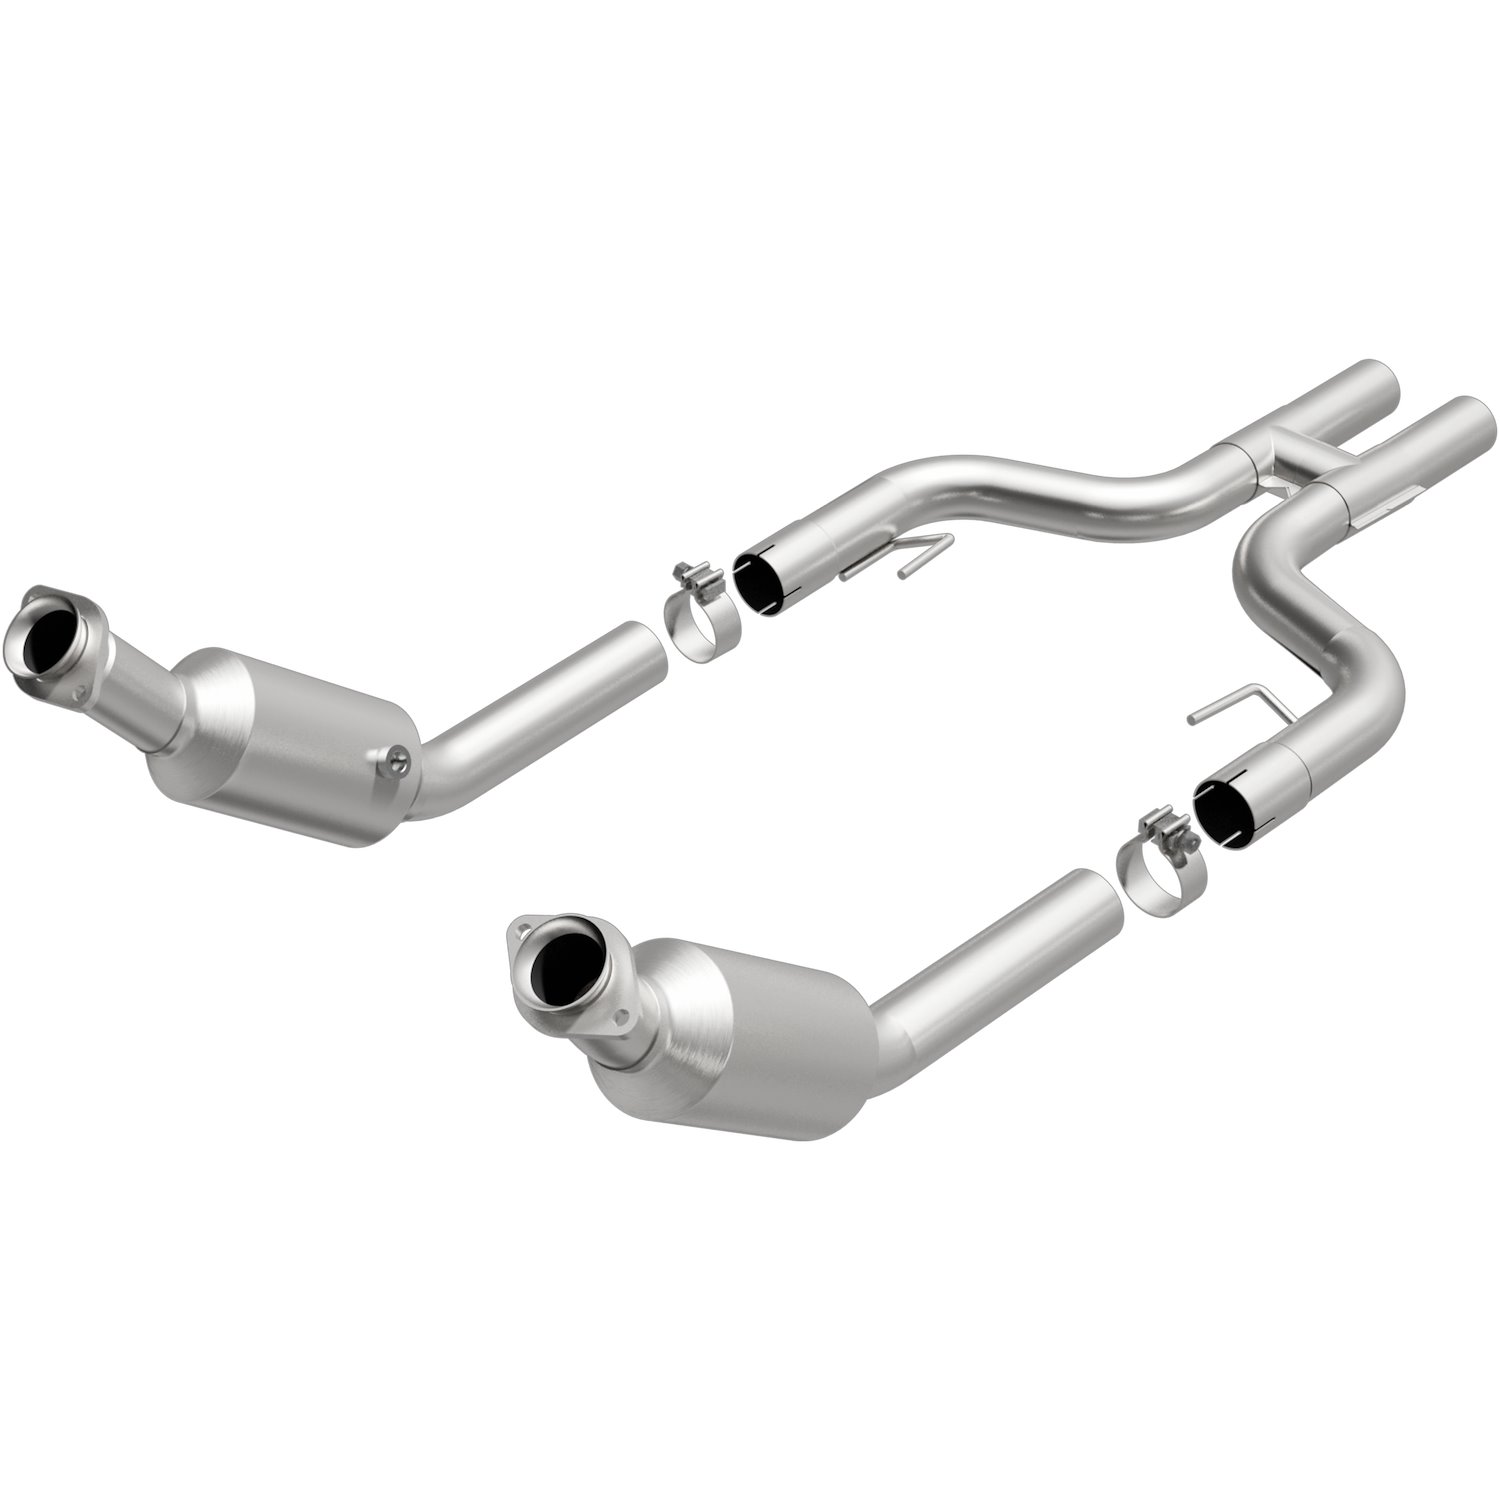 2007-2010 Ford Mustang California Grade CARB Compliant Direct-Fit Catalytic Converter